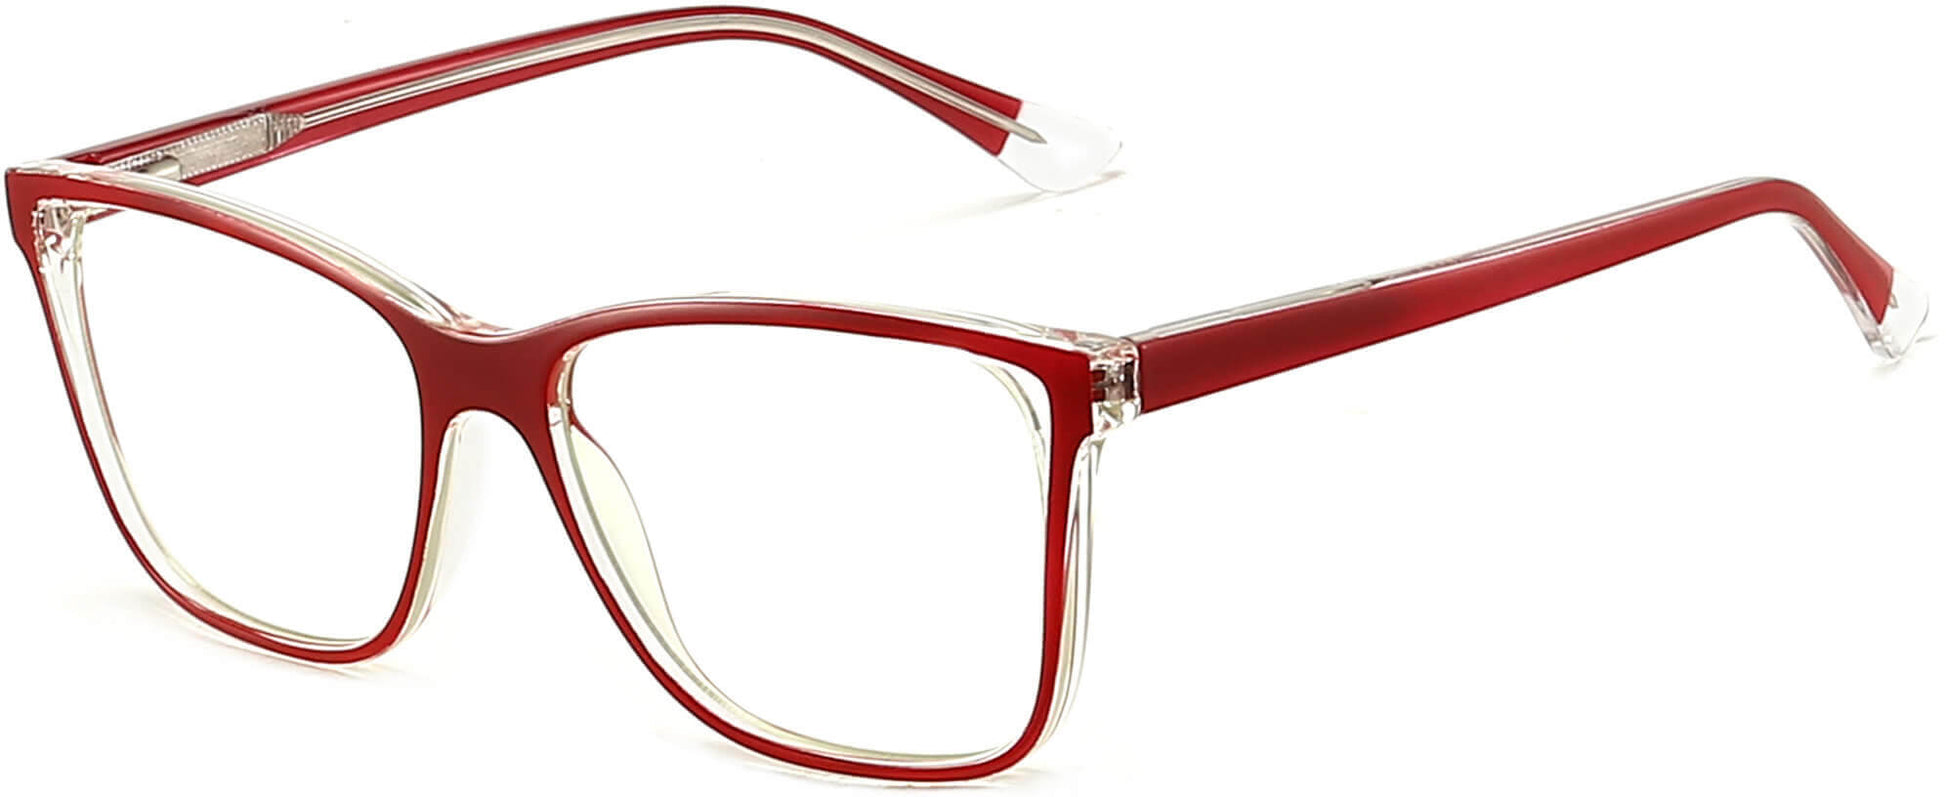 Tracy Cateye Red Eyeglasses from ANRRI, angle view